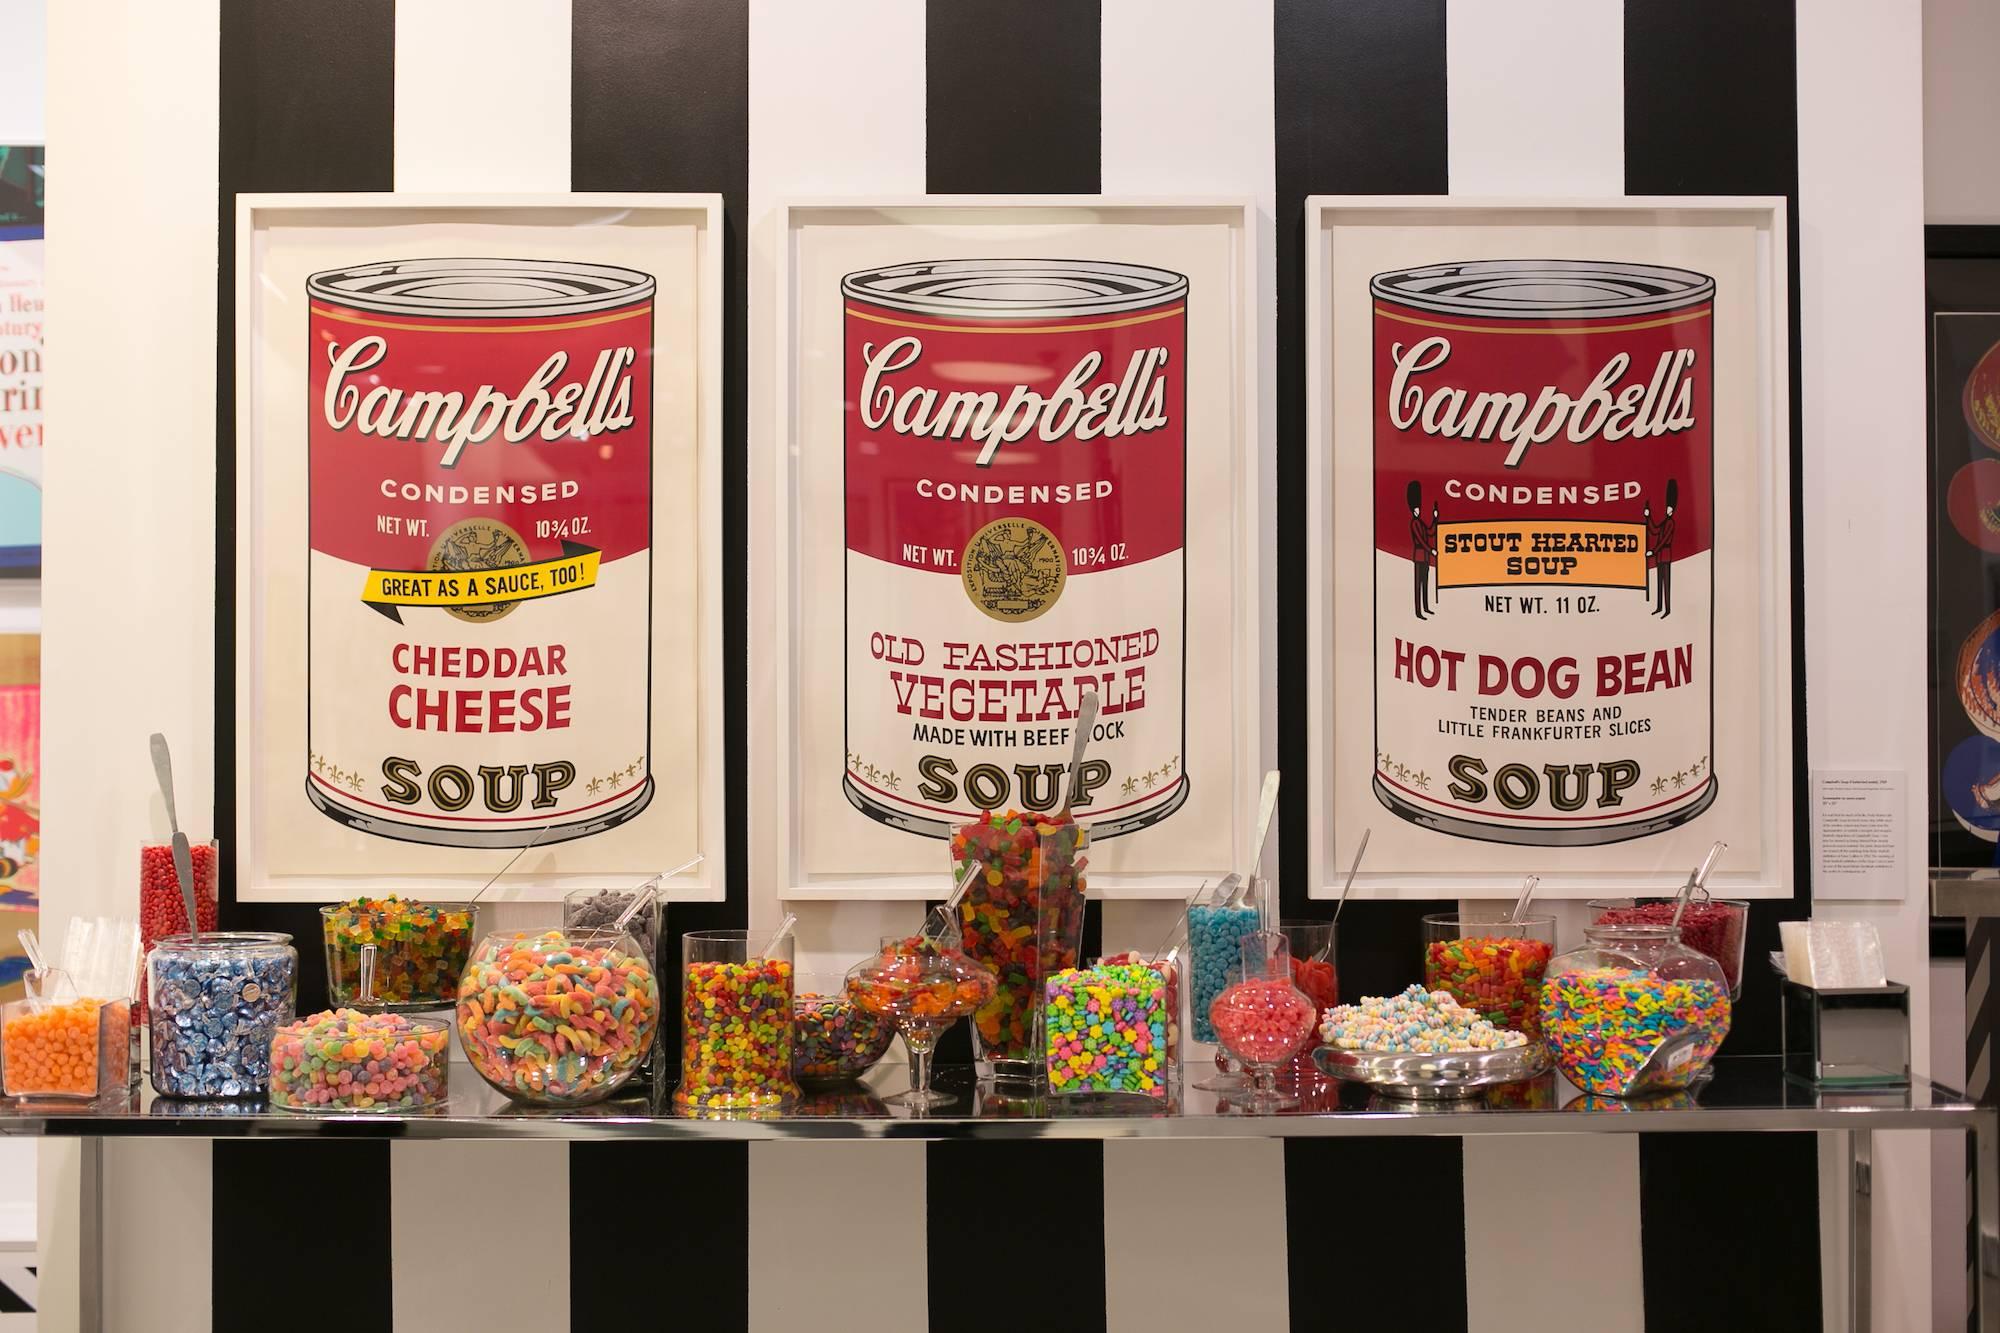 warhol campbell's soup old fashioned vegetable